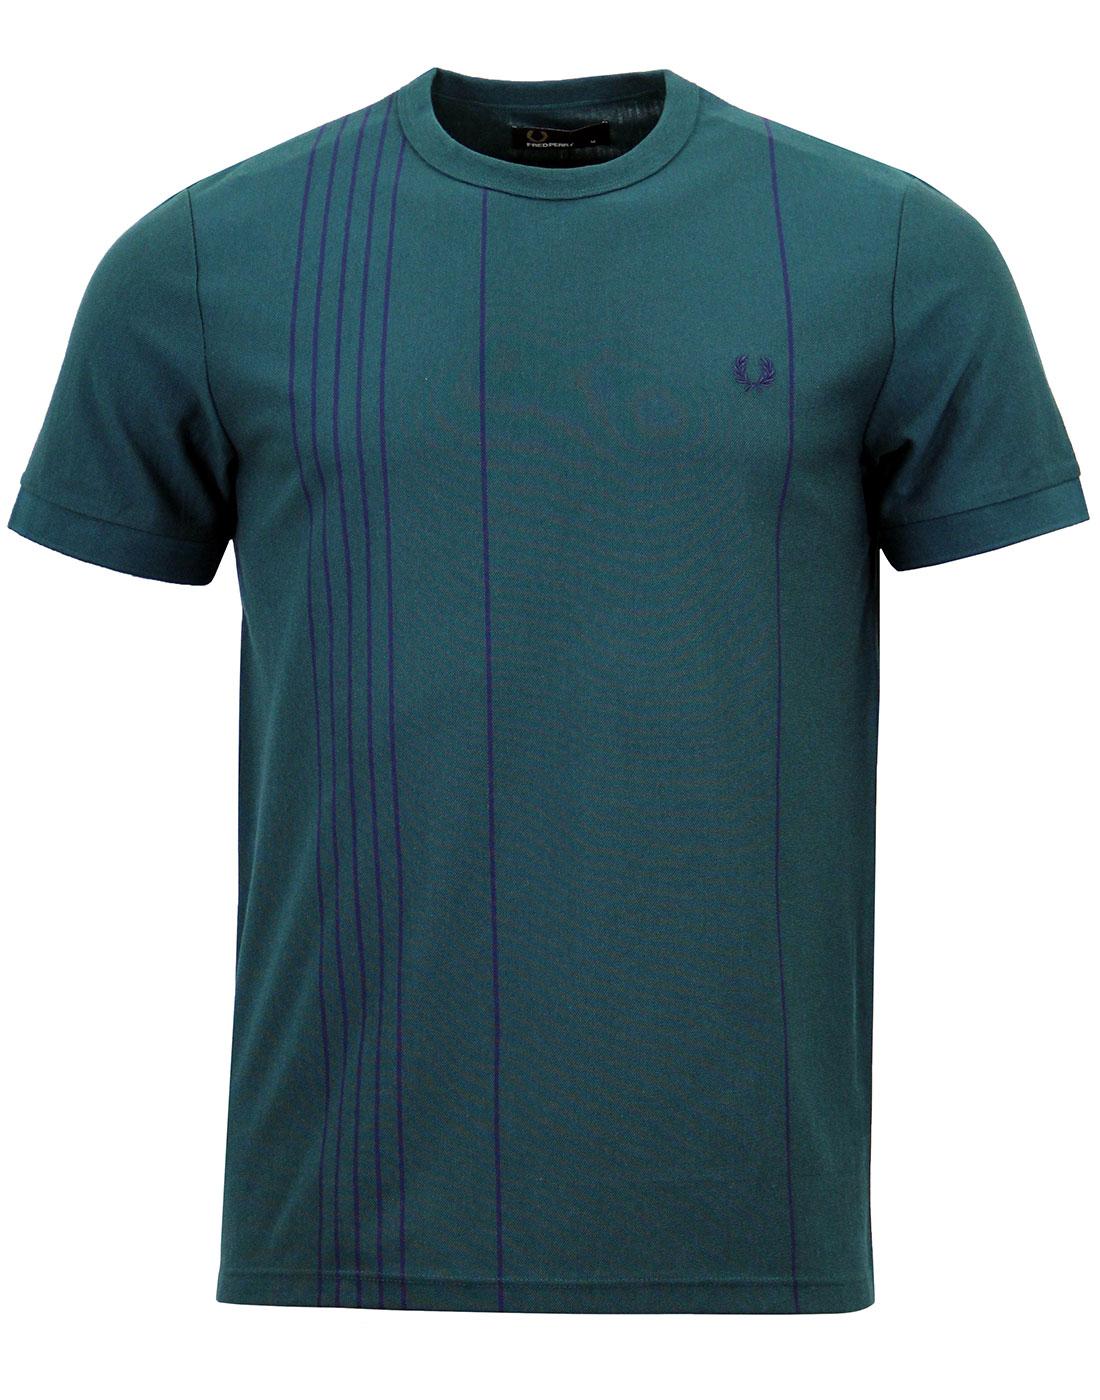 FRED PERRY Mens Retro 70s Vertical Stripe Tee 